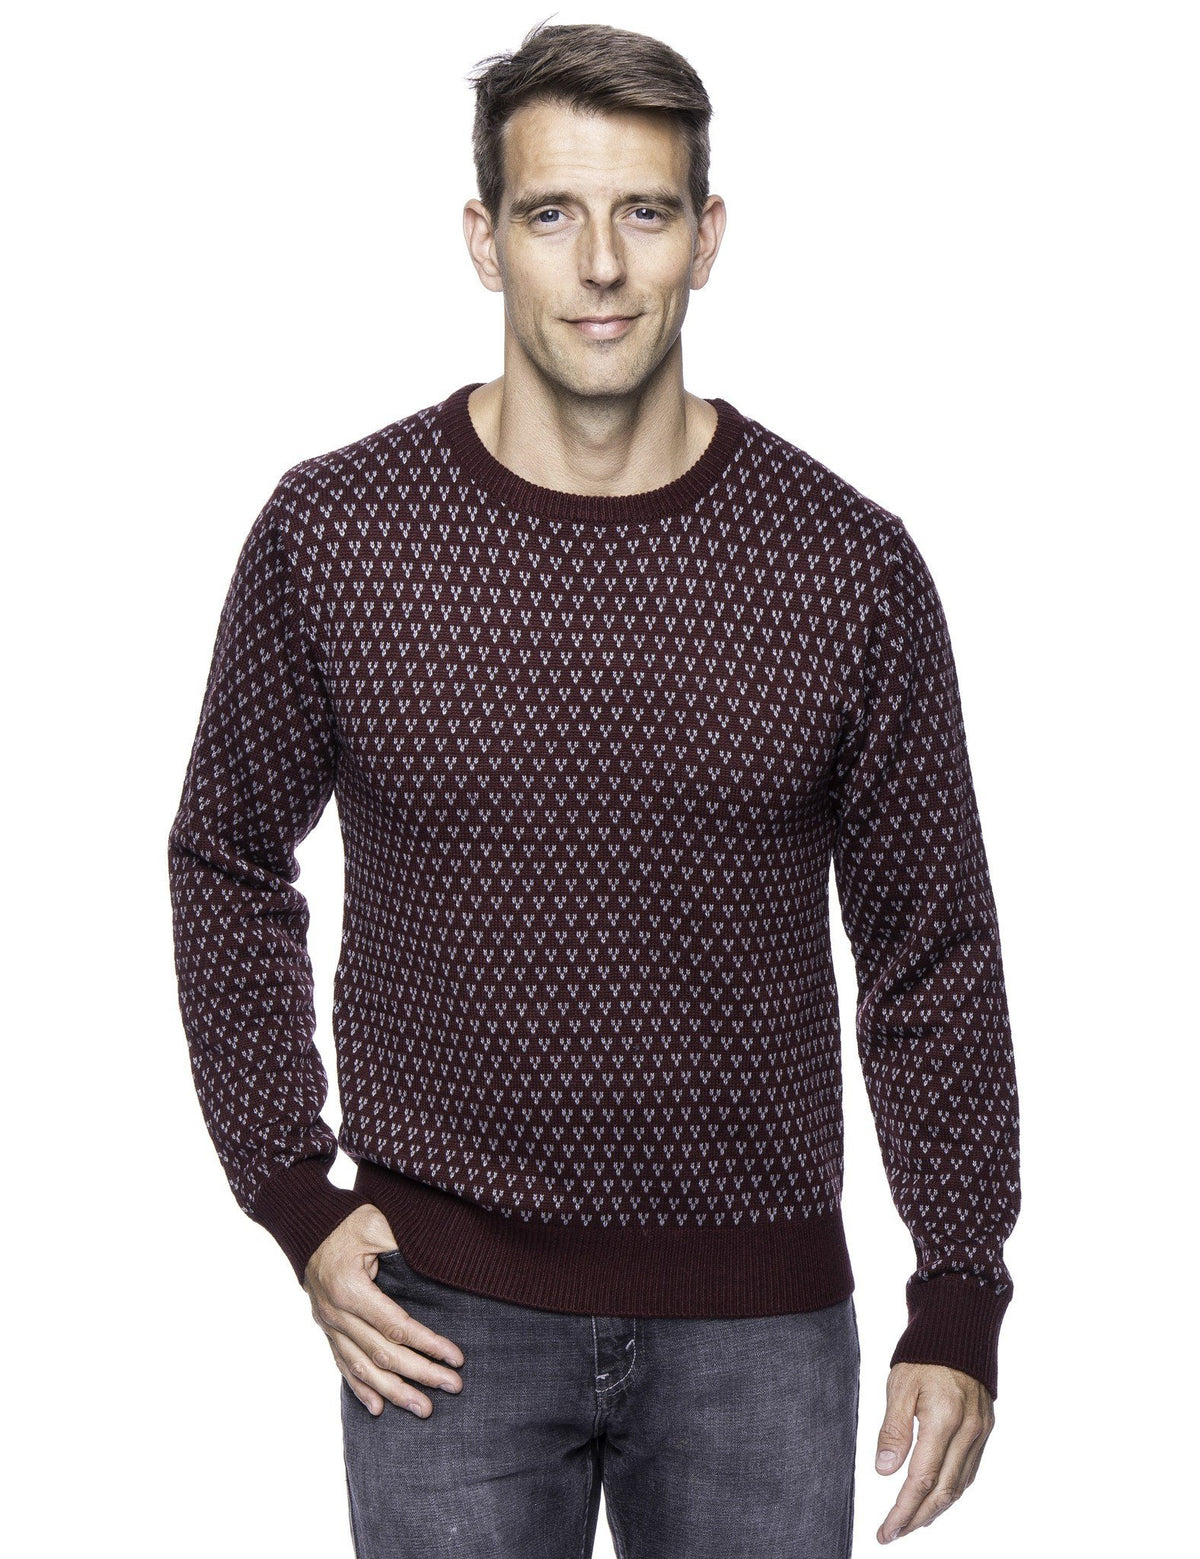 Men's Wool Blend Crew Neck Pullover Sweater with Jacquard Effect - Bordeaux/Heather Grey